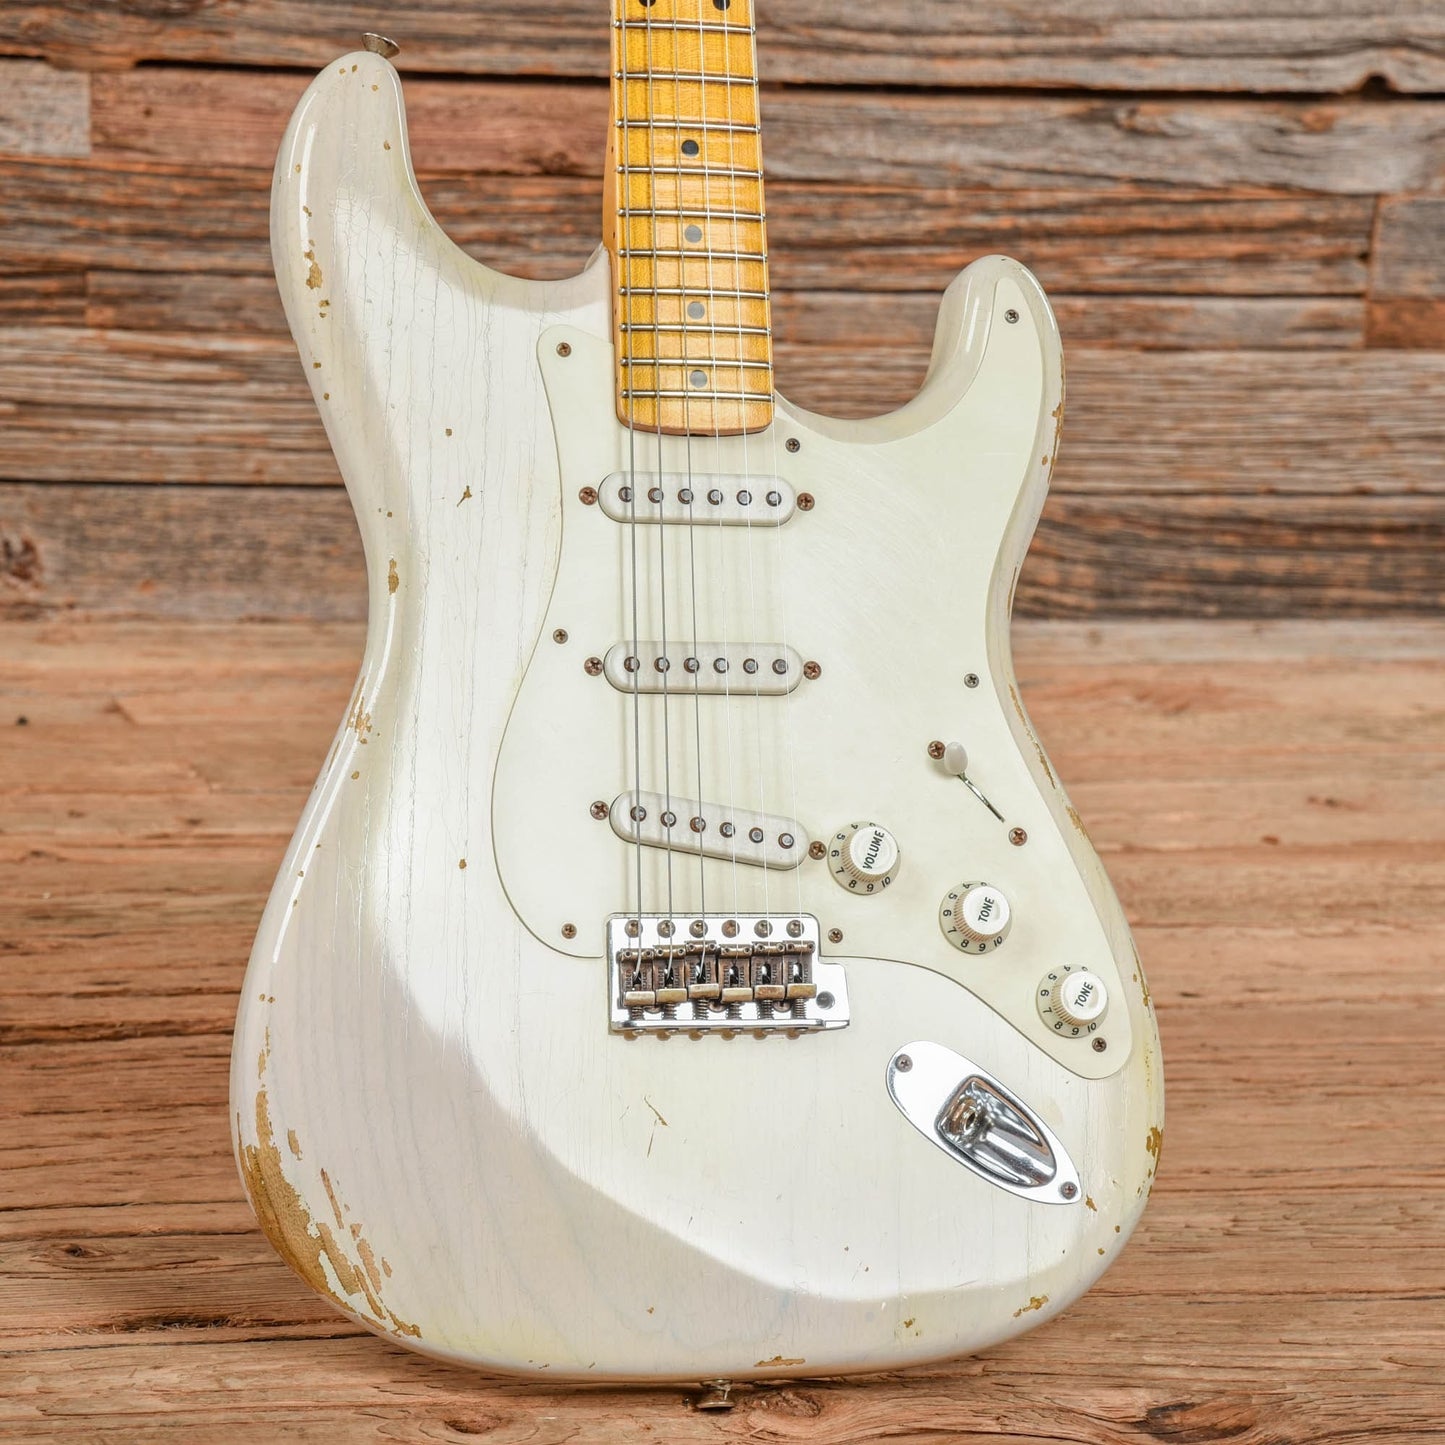 Fender Custom Shop '54 Stratocaster Heavy Relic Aged White Blonde 2015 Electric Guitars / Solid Body